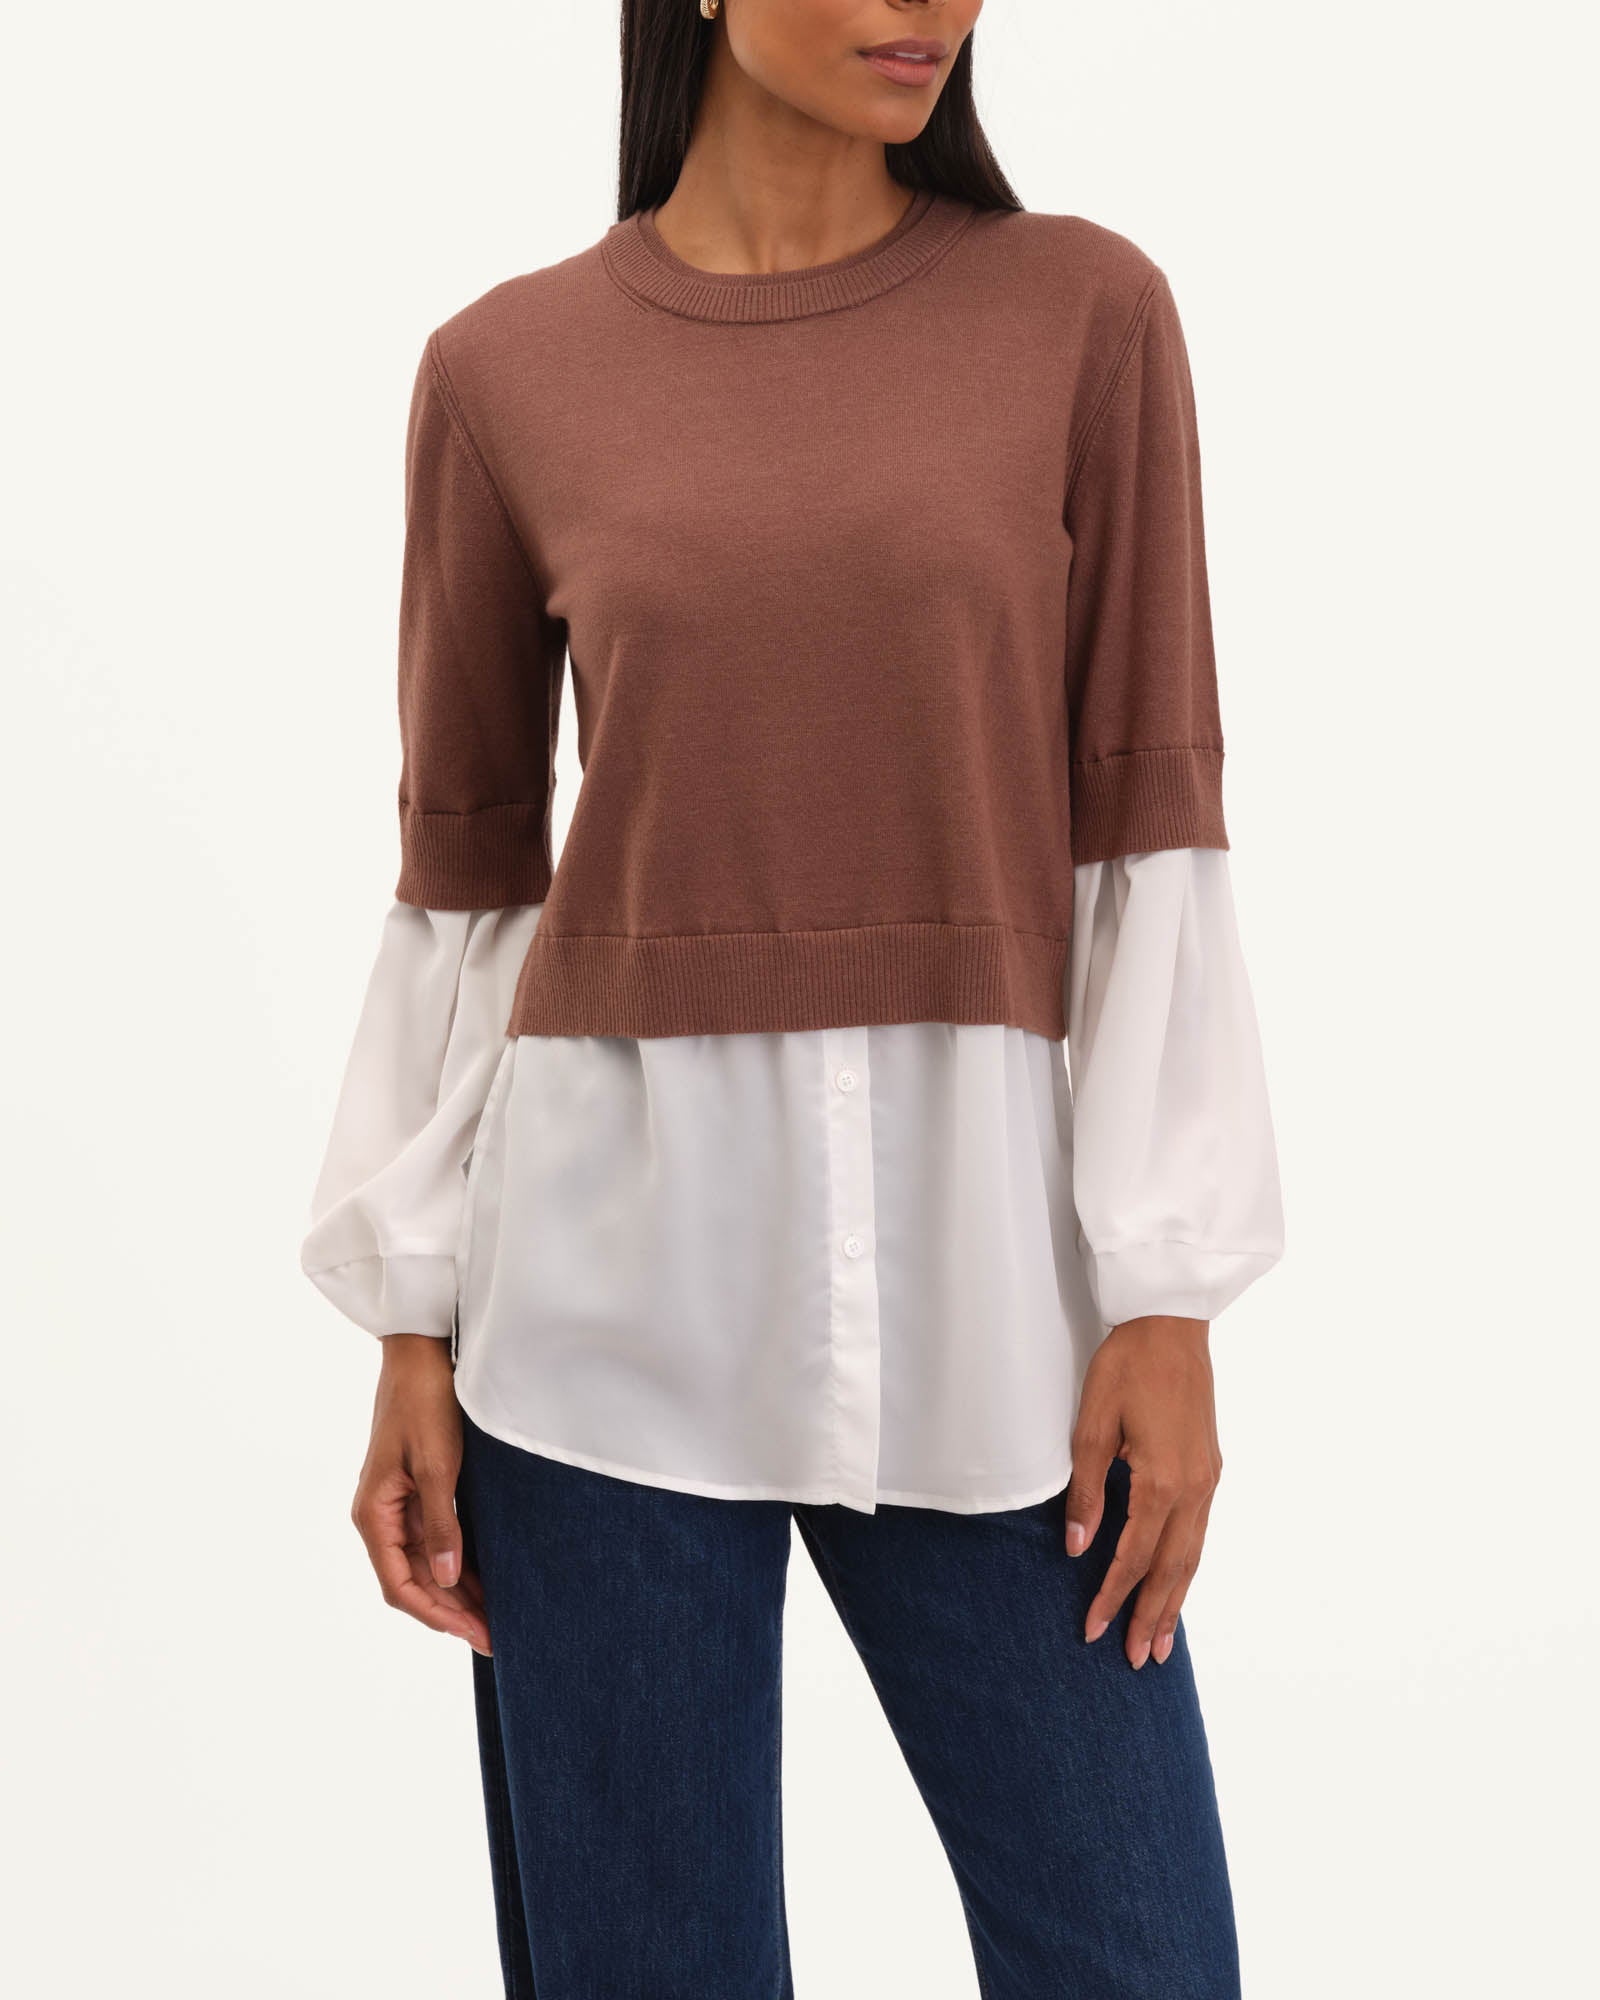 Truth Women Double Crewneck Twofer Sweater, Coffee Heather/Ivory